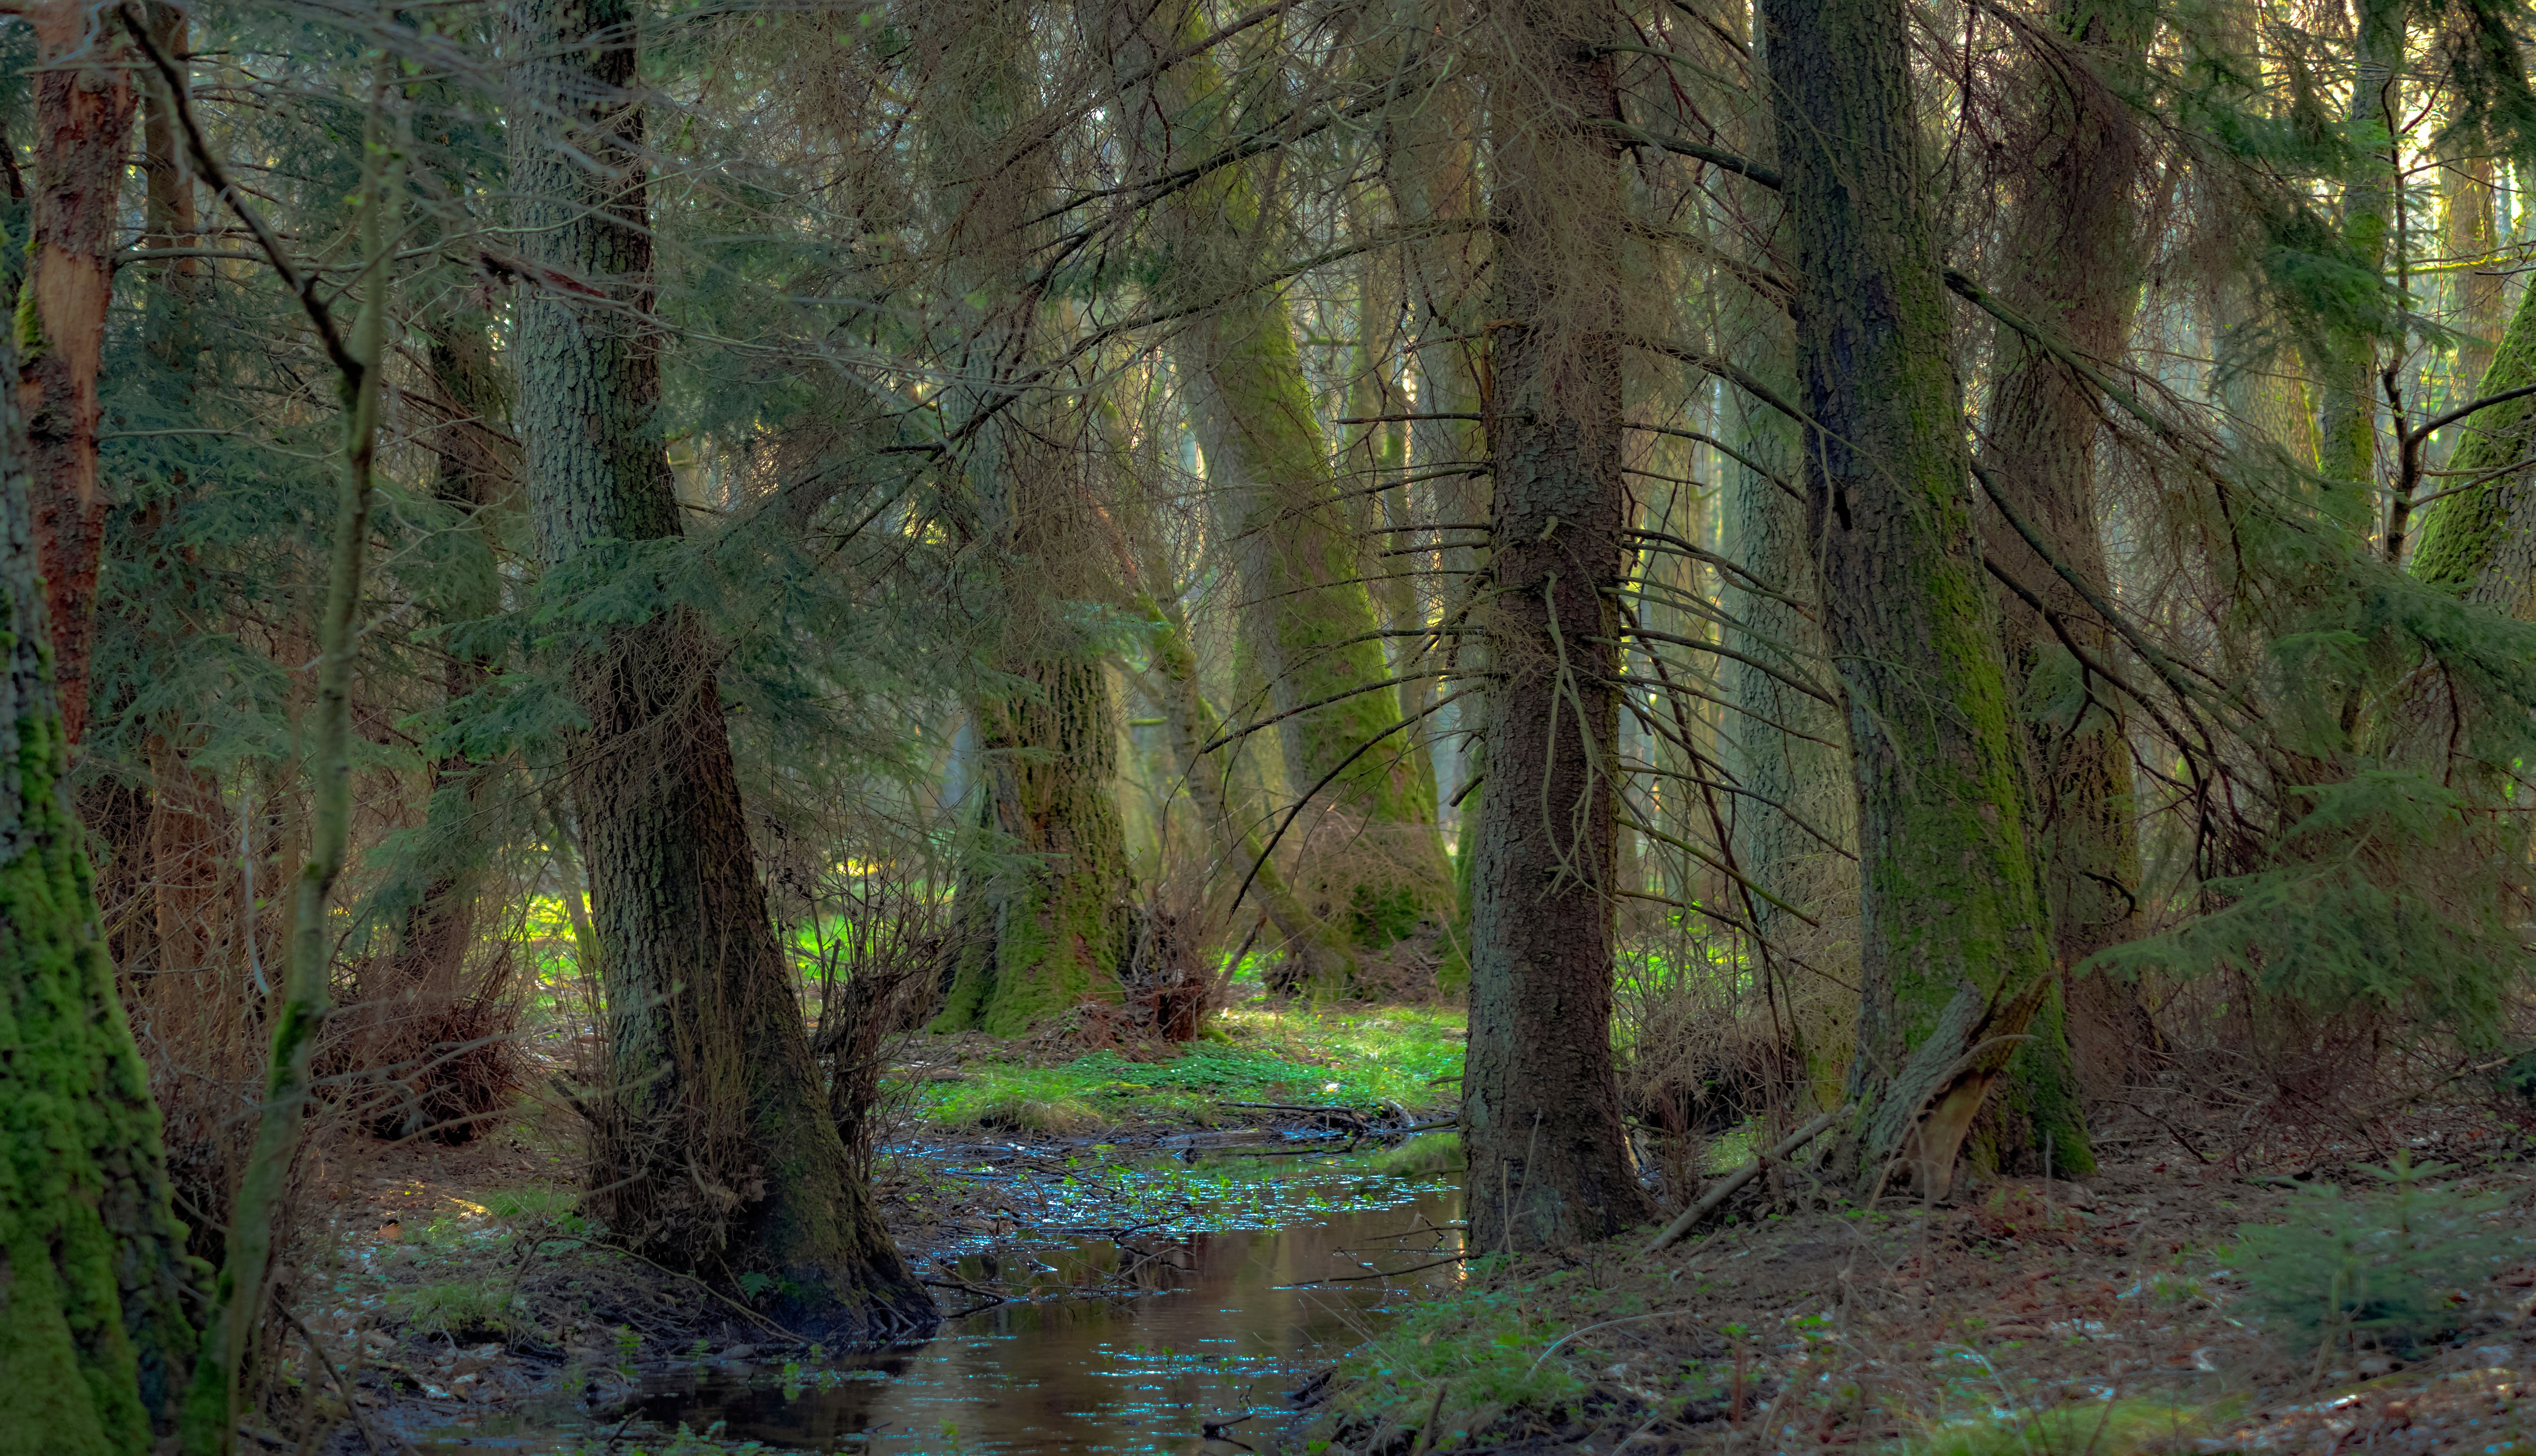 Forest, trees, nature, Mist, Light, Morning, Water, Forest stream, Moss, Water, Woody atmosphere, Fog, Krzysztof Tollas